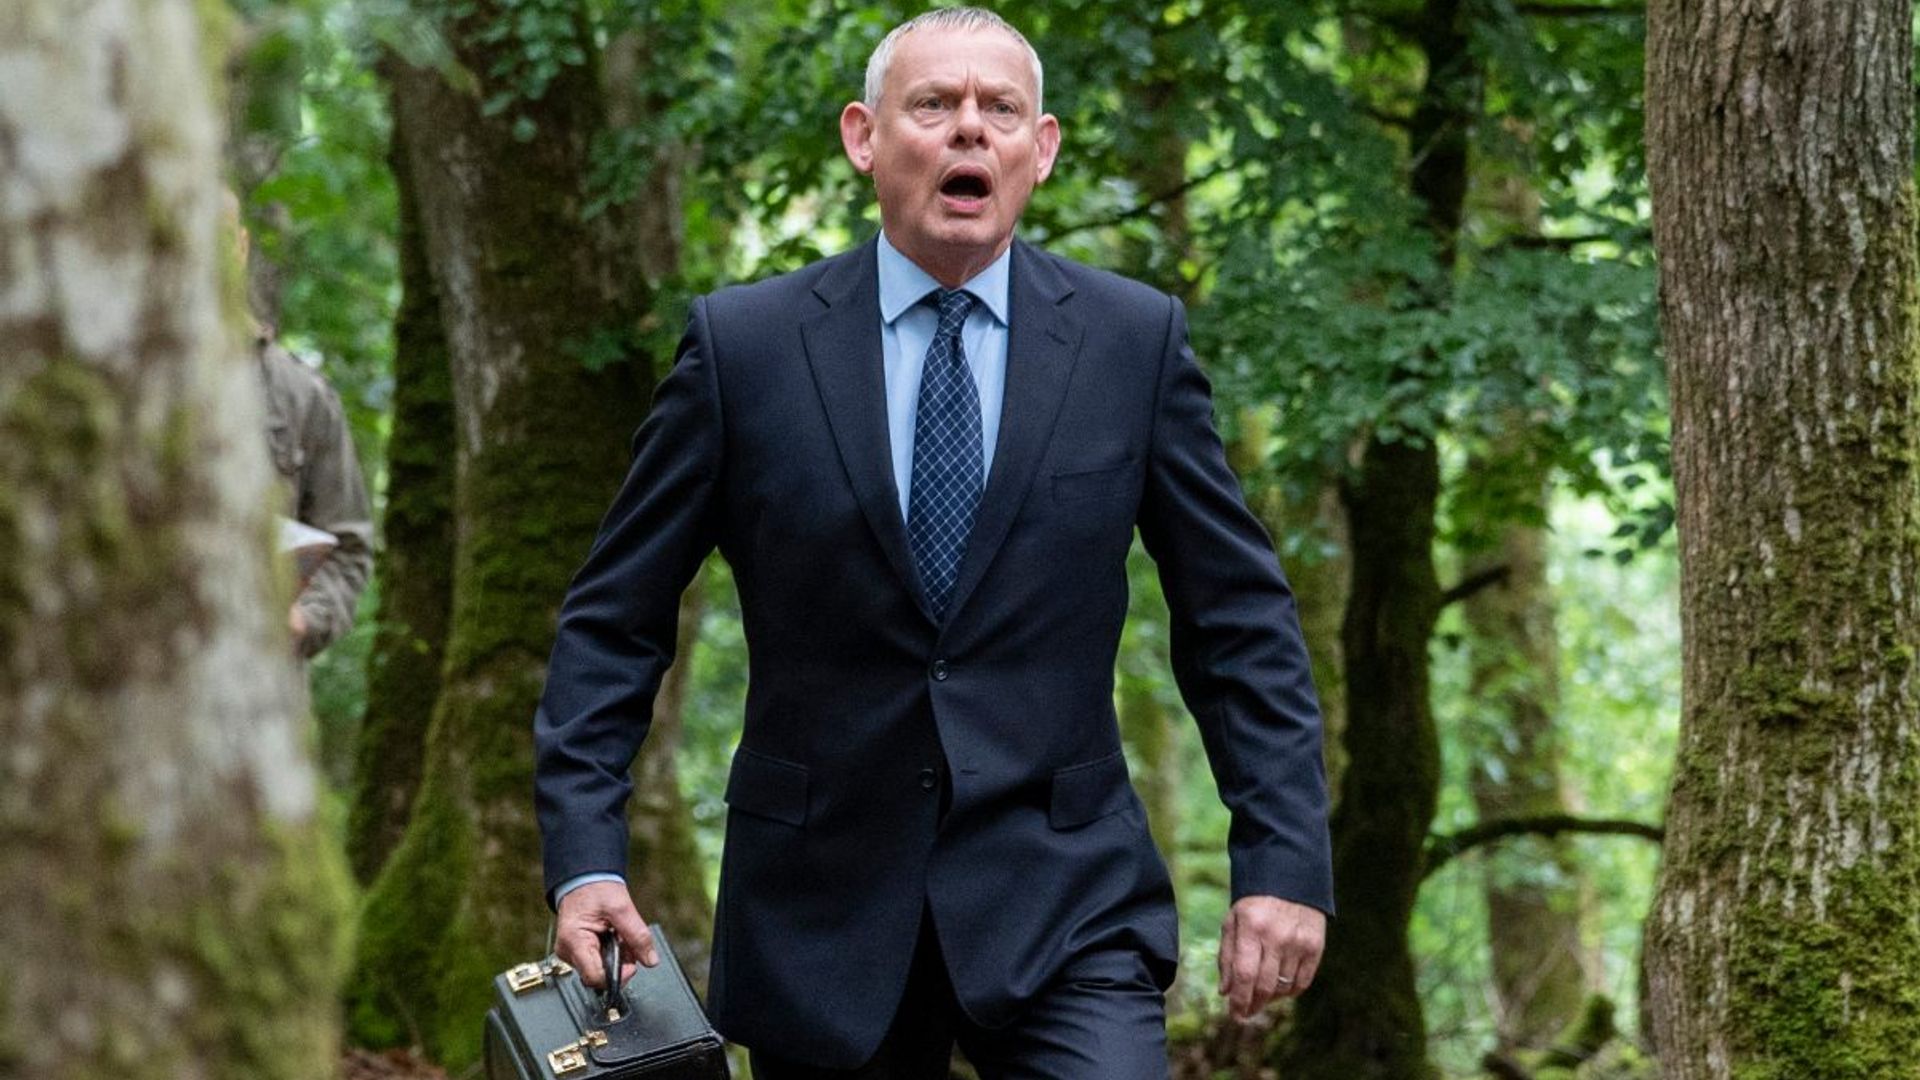 Doc Martin viewers have same reaction to hidden detail